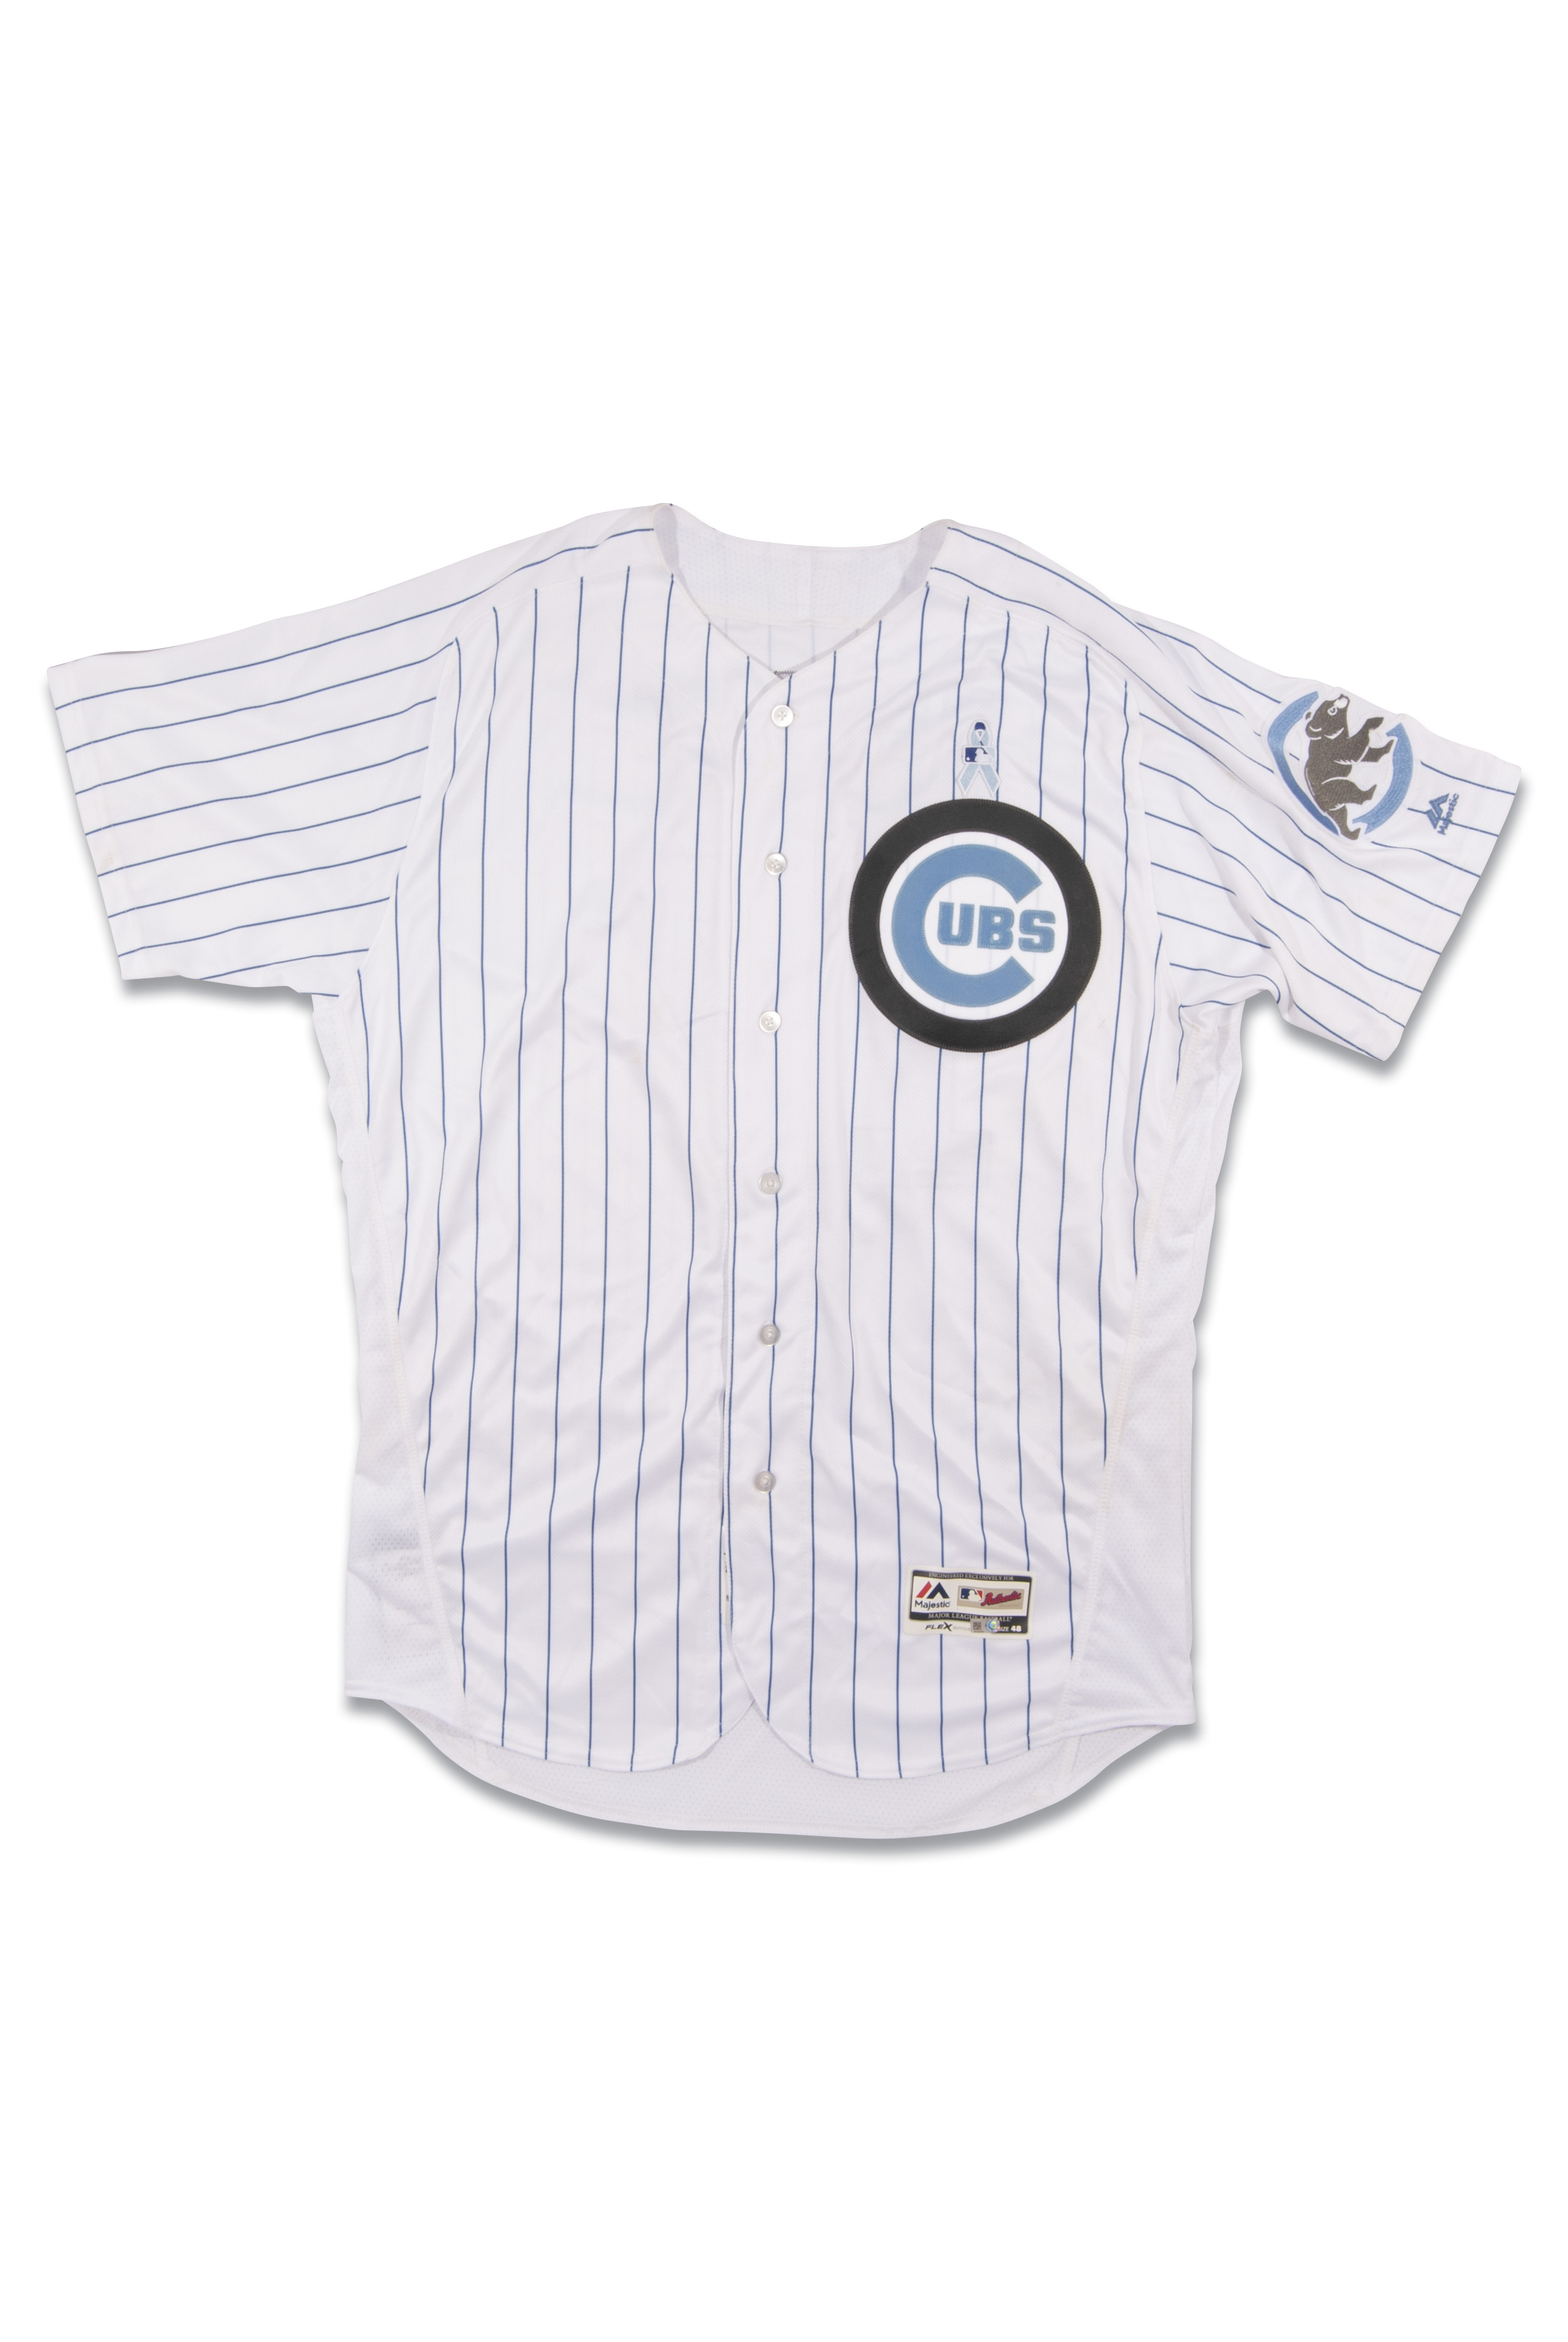 kris bryant father's day jersey